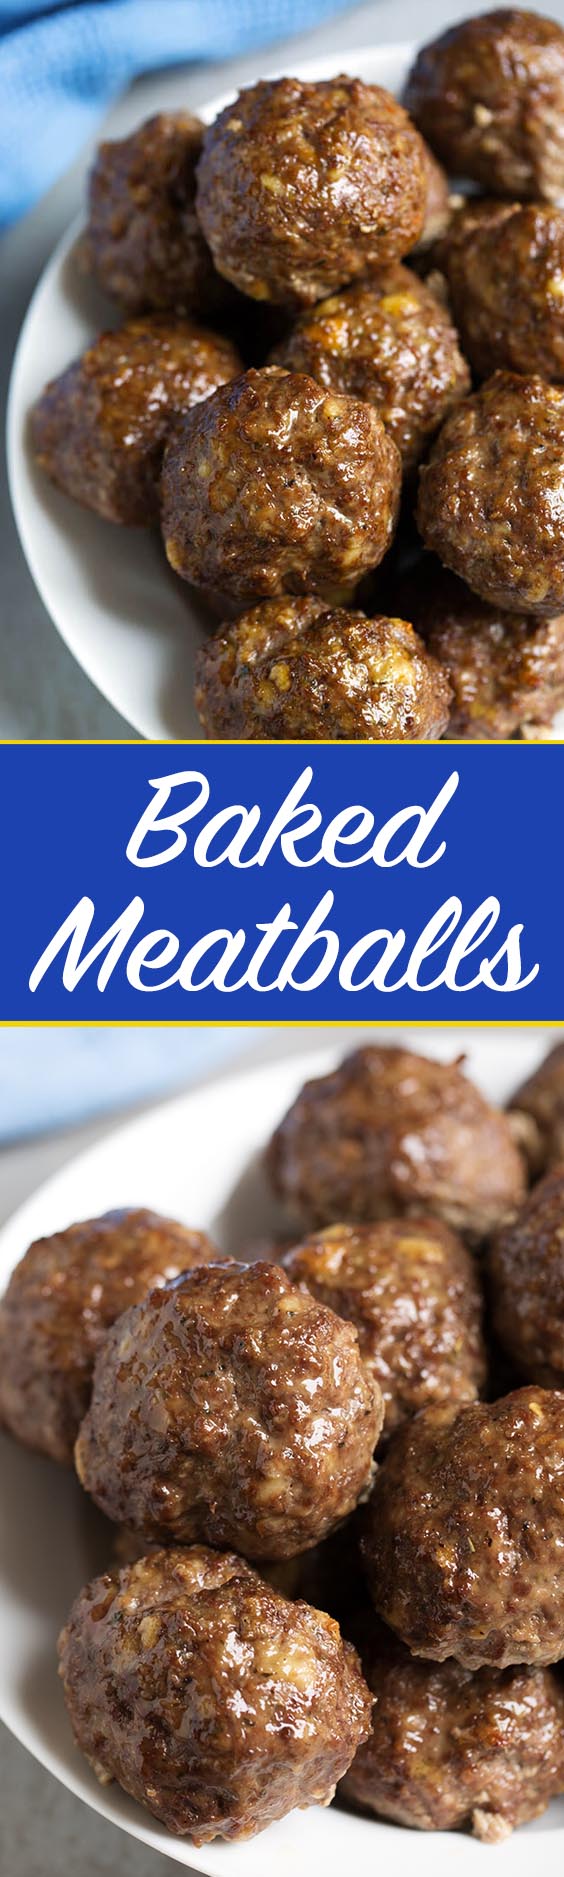 Easy Baked Meatballs have amazing flavor, and are ready in under an hour. We love them in spaghetti! simplyhappyfoodie.com #easymeatballs #bakedmeatballs #meatballs